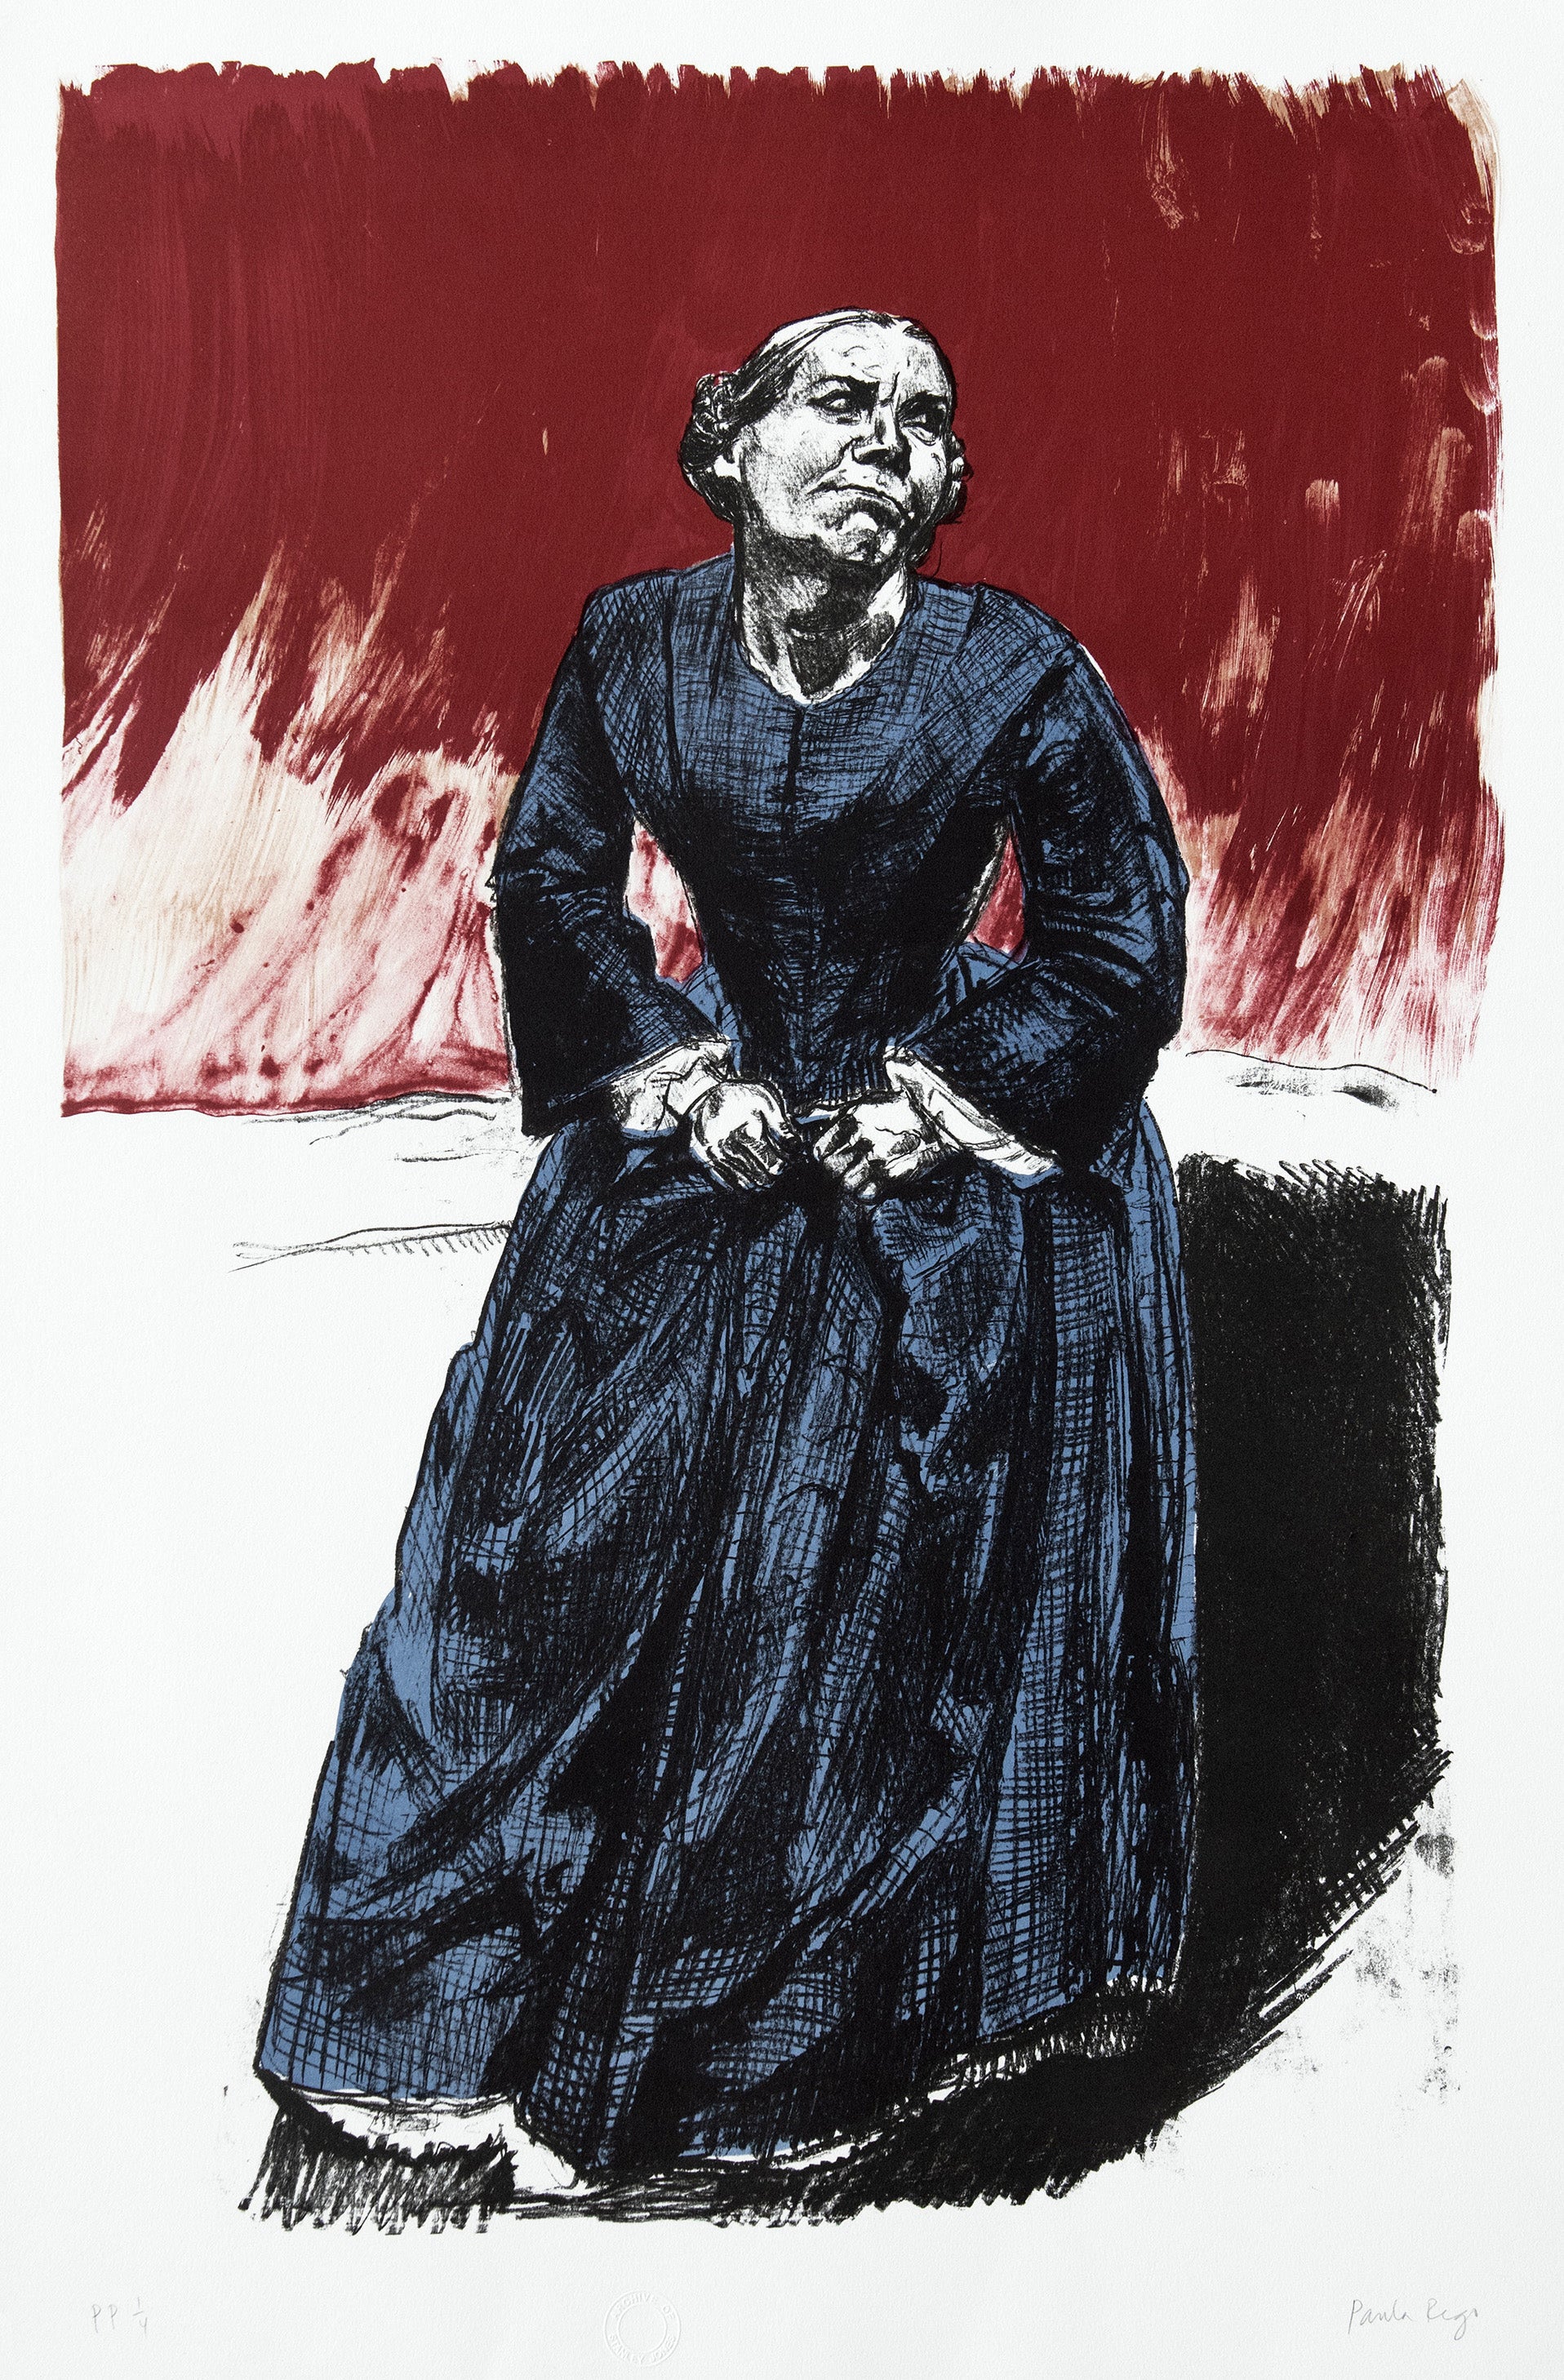 Come to Me, signed lithograph from Jane Eyre by Paula Rego